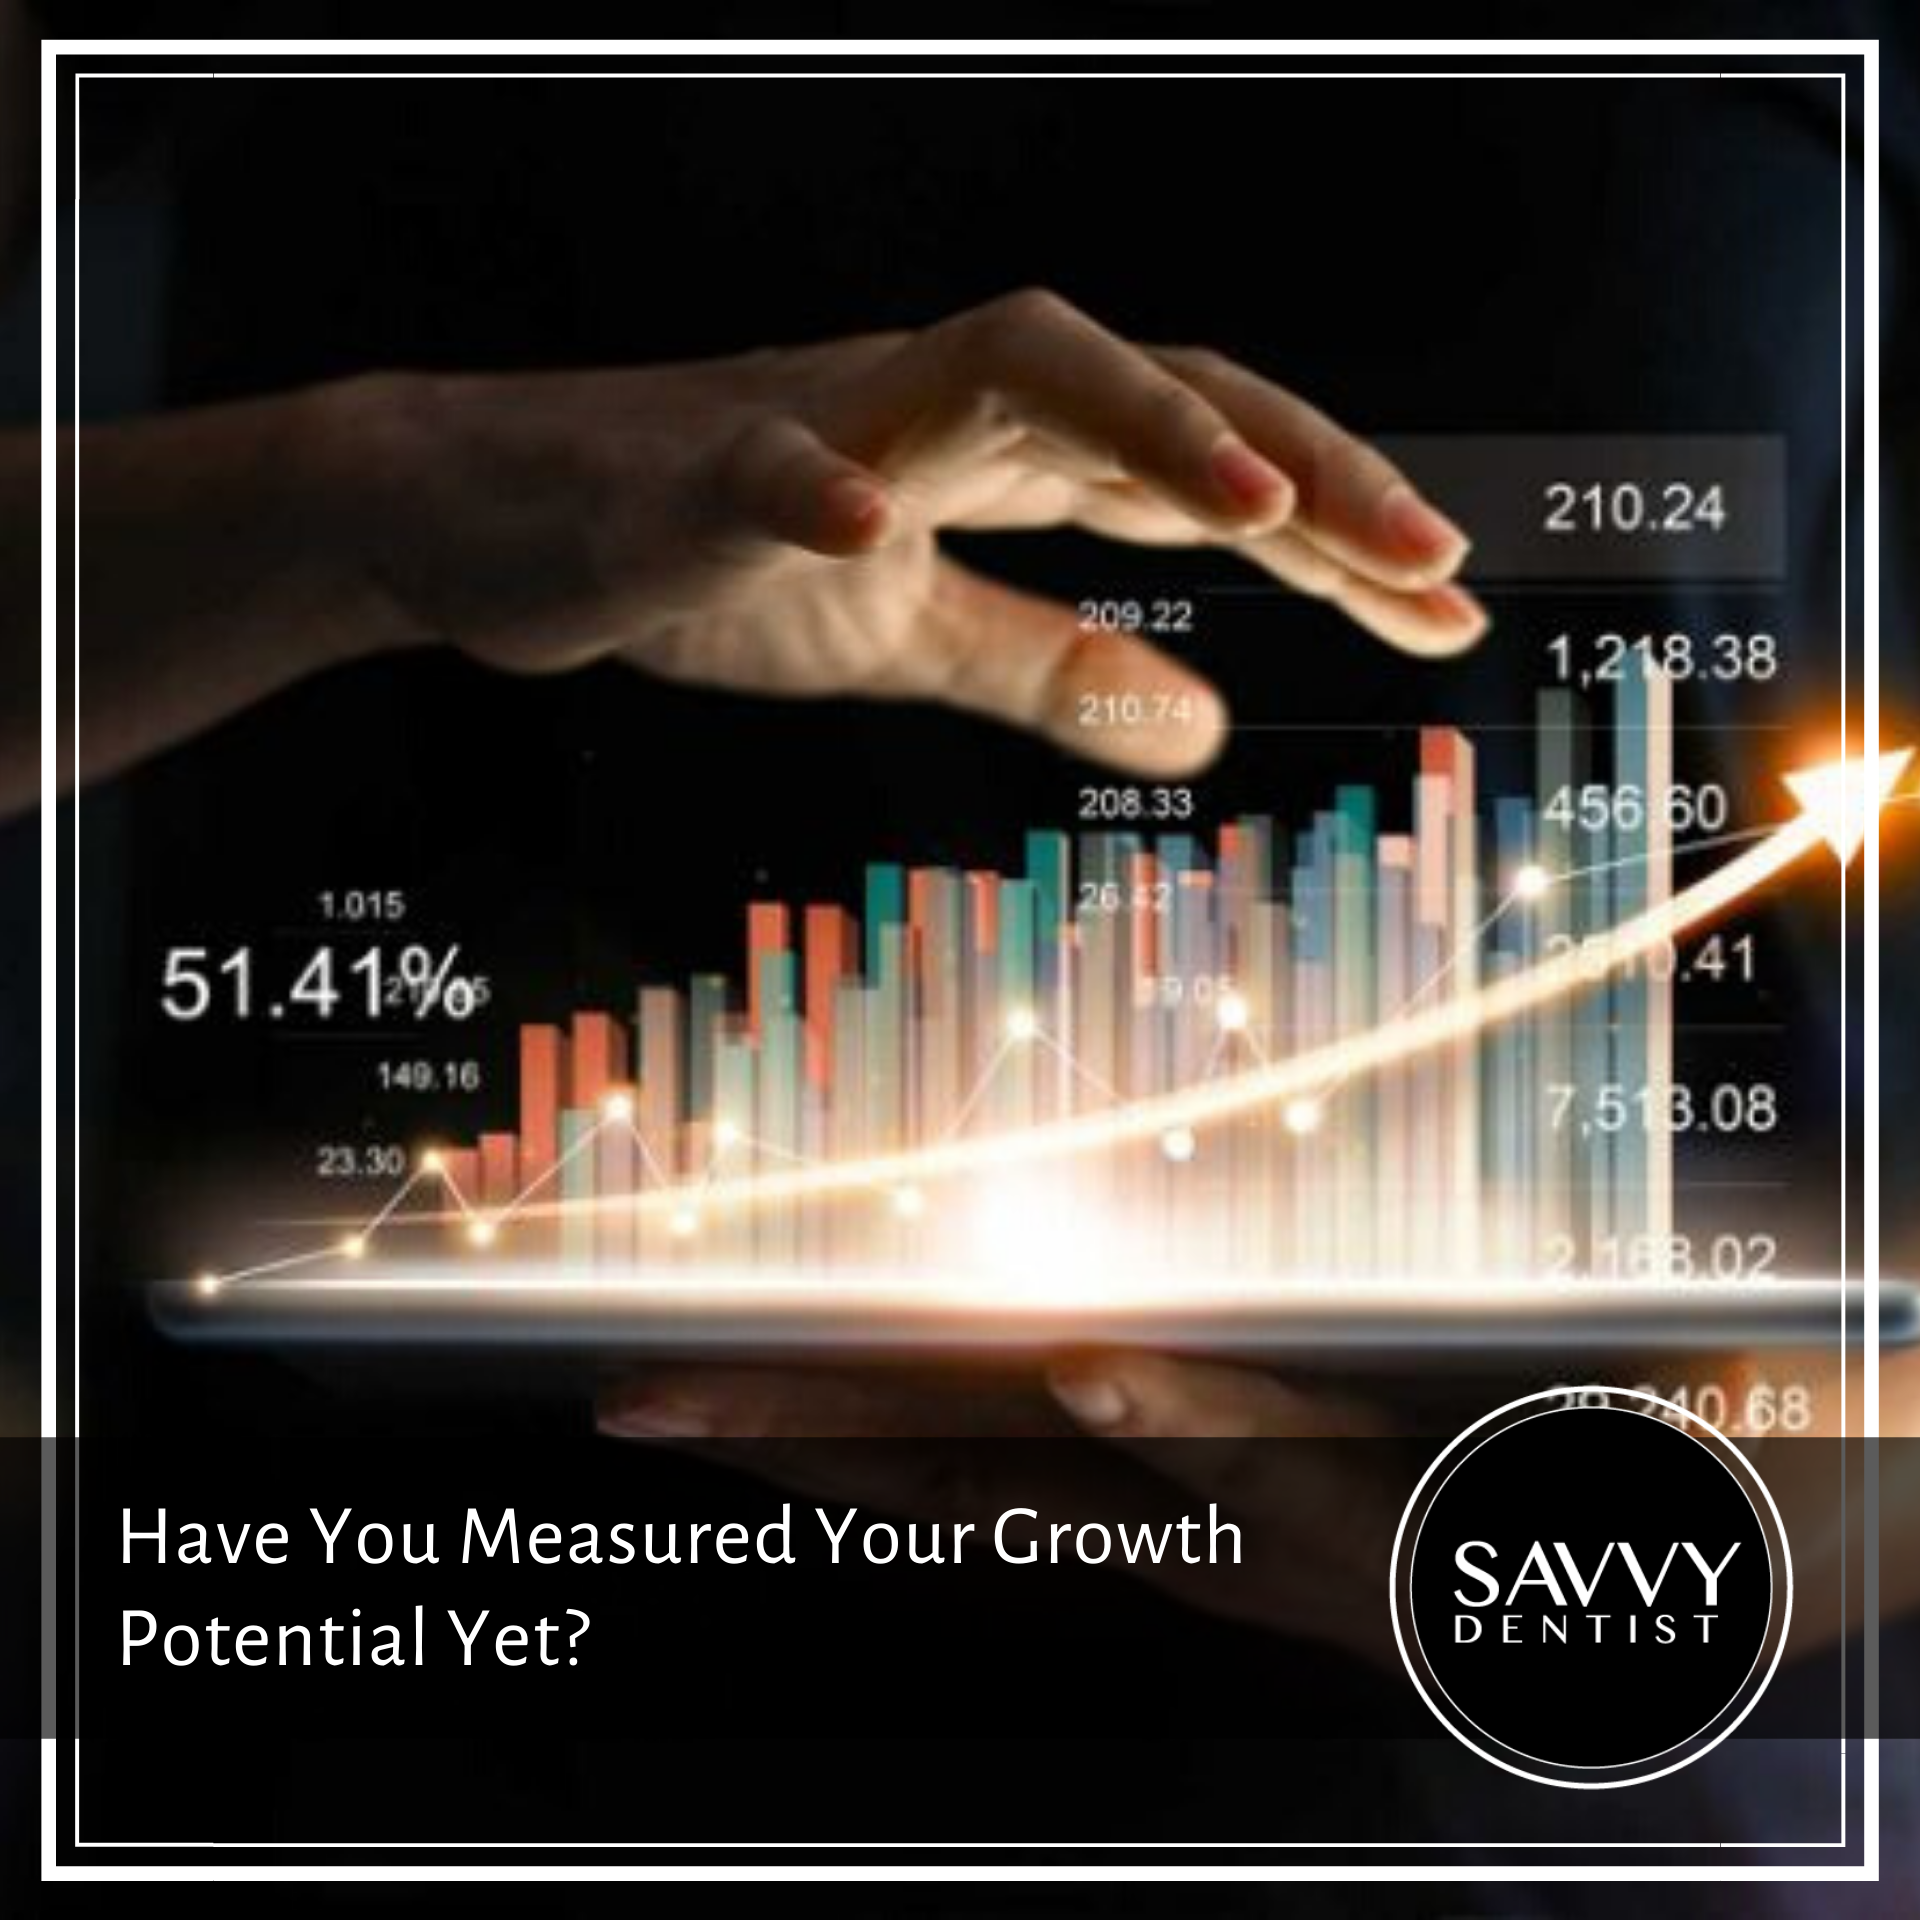 Have You Measured Your Growth Potential Yet?